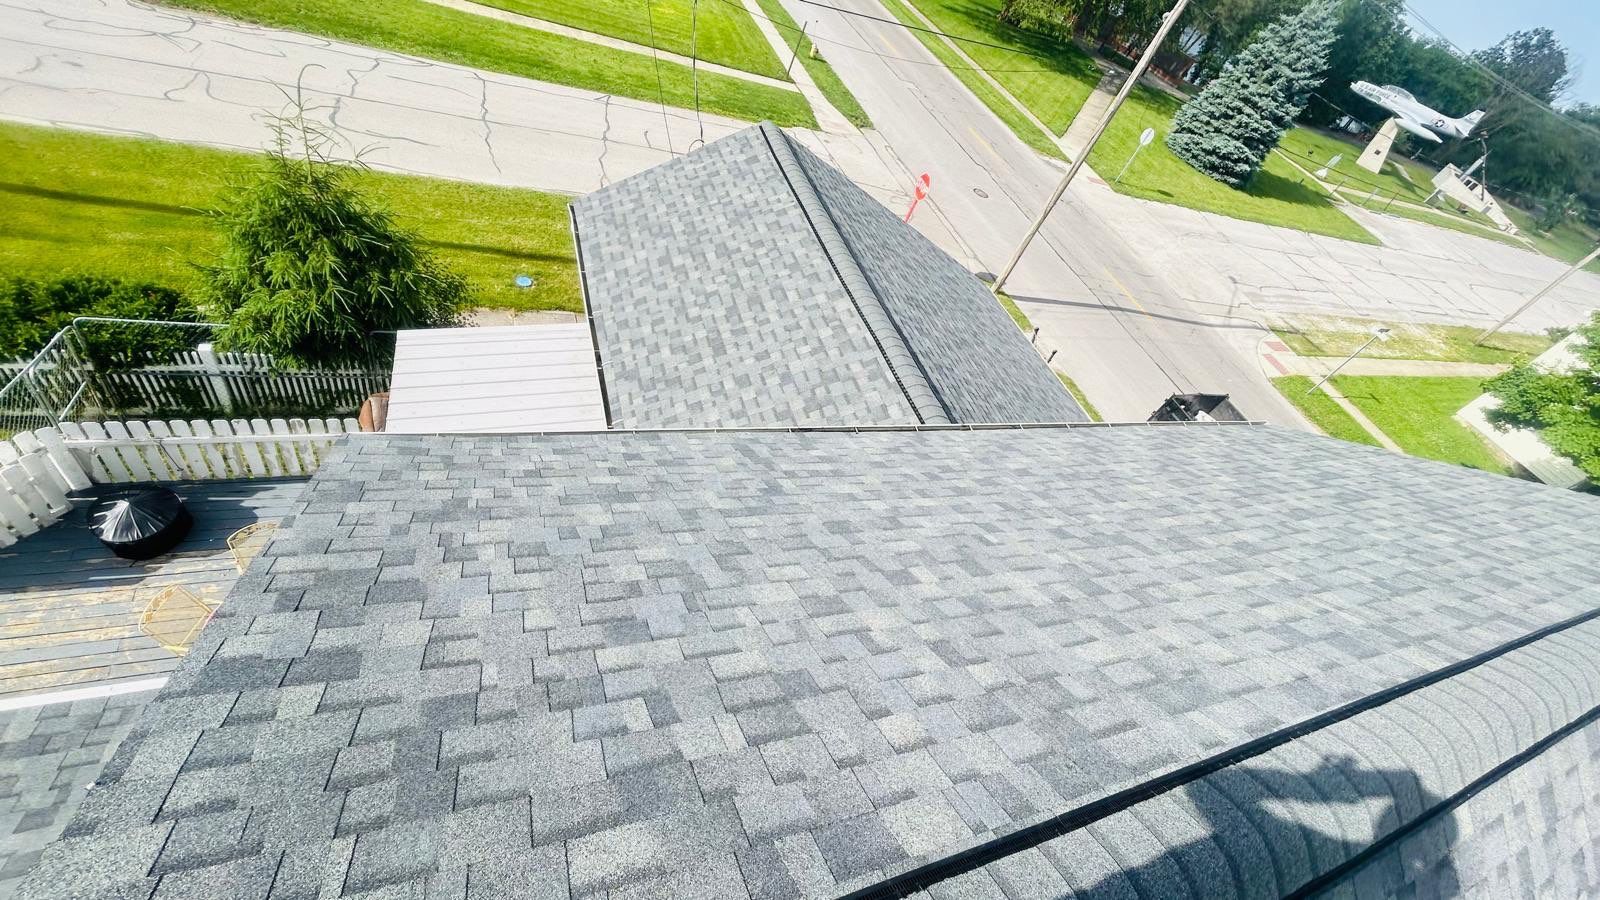 A rooftop view showing gray asphalt shingles on building roofs with a street, grass lawns, and a model airplane monument in the background highlights our work in maintaining top-notch quality.